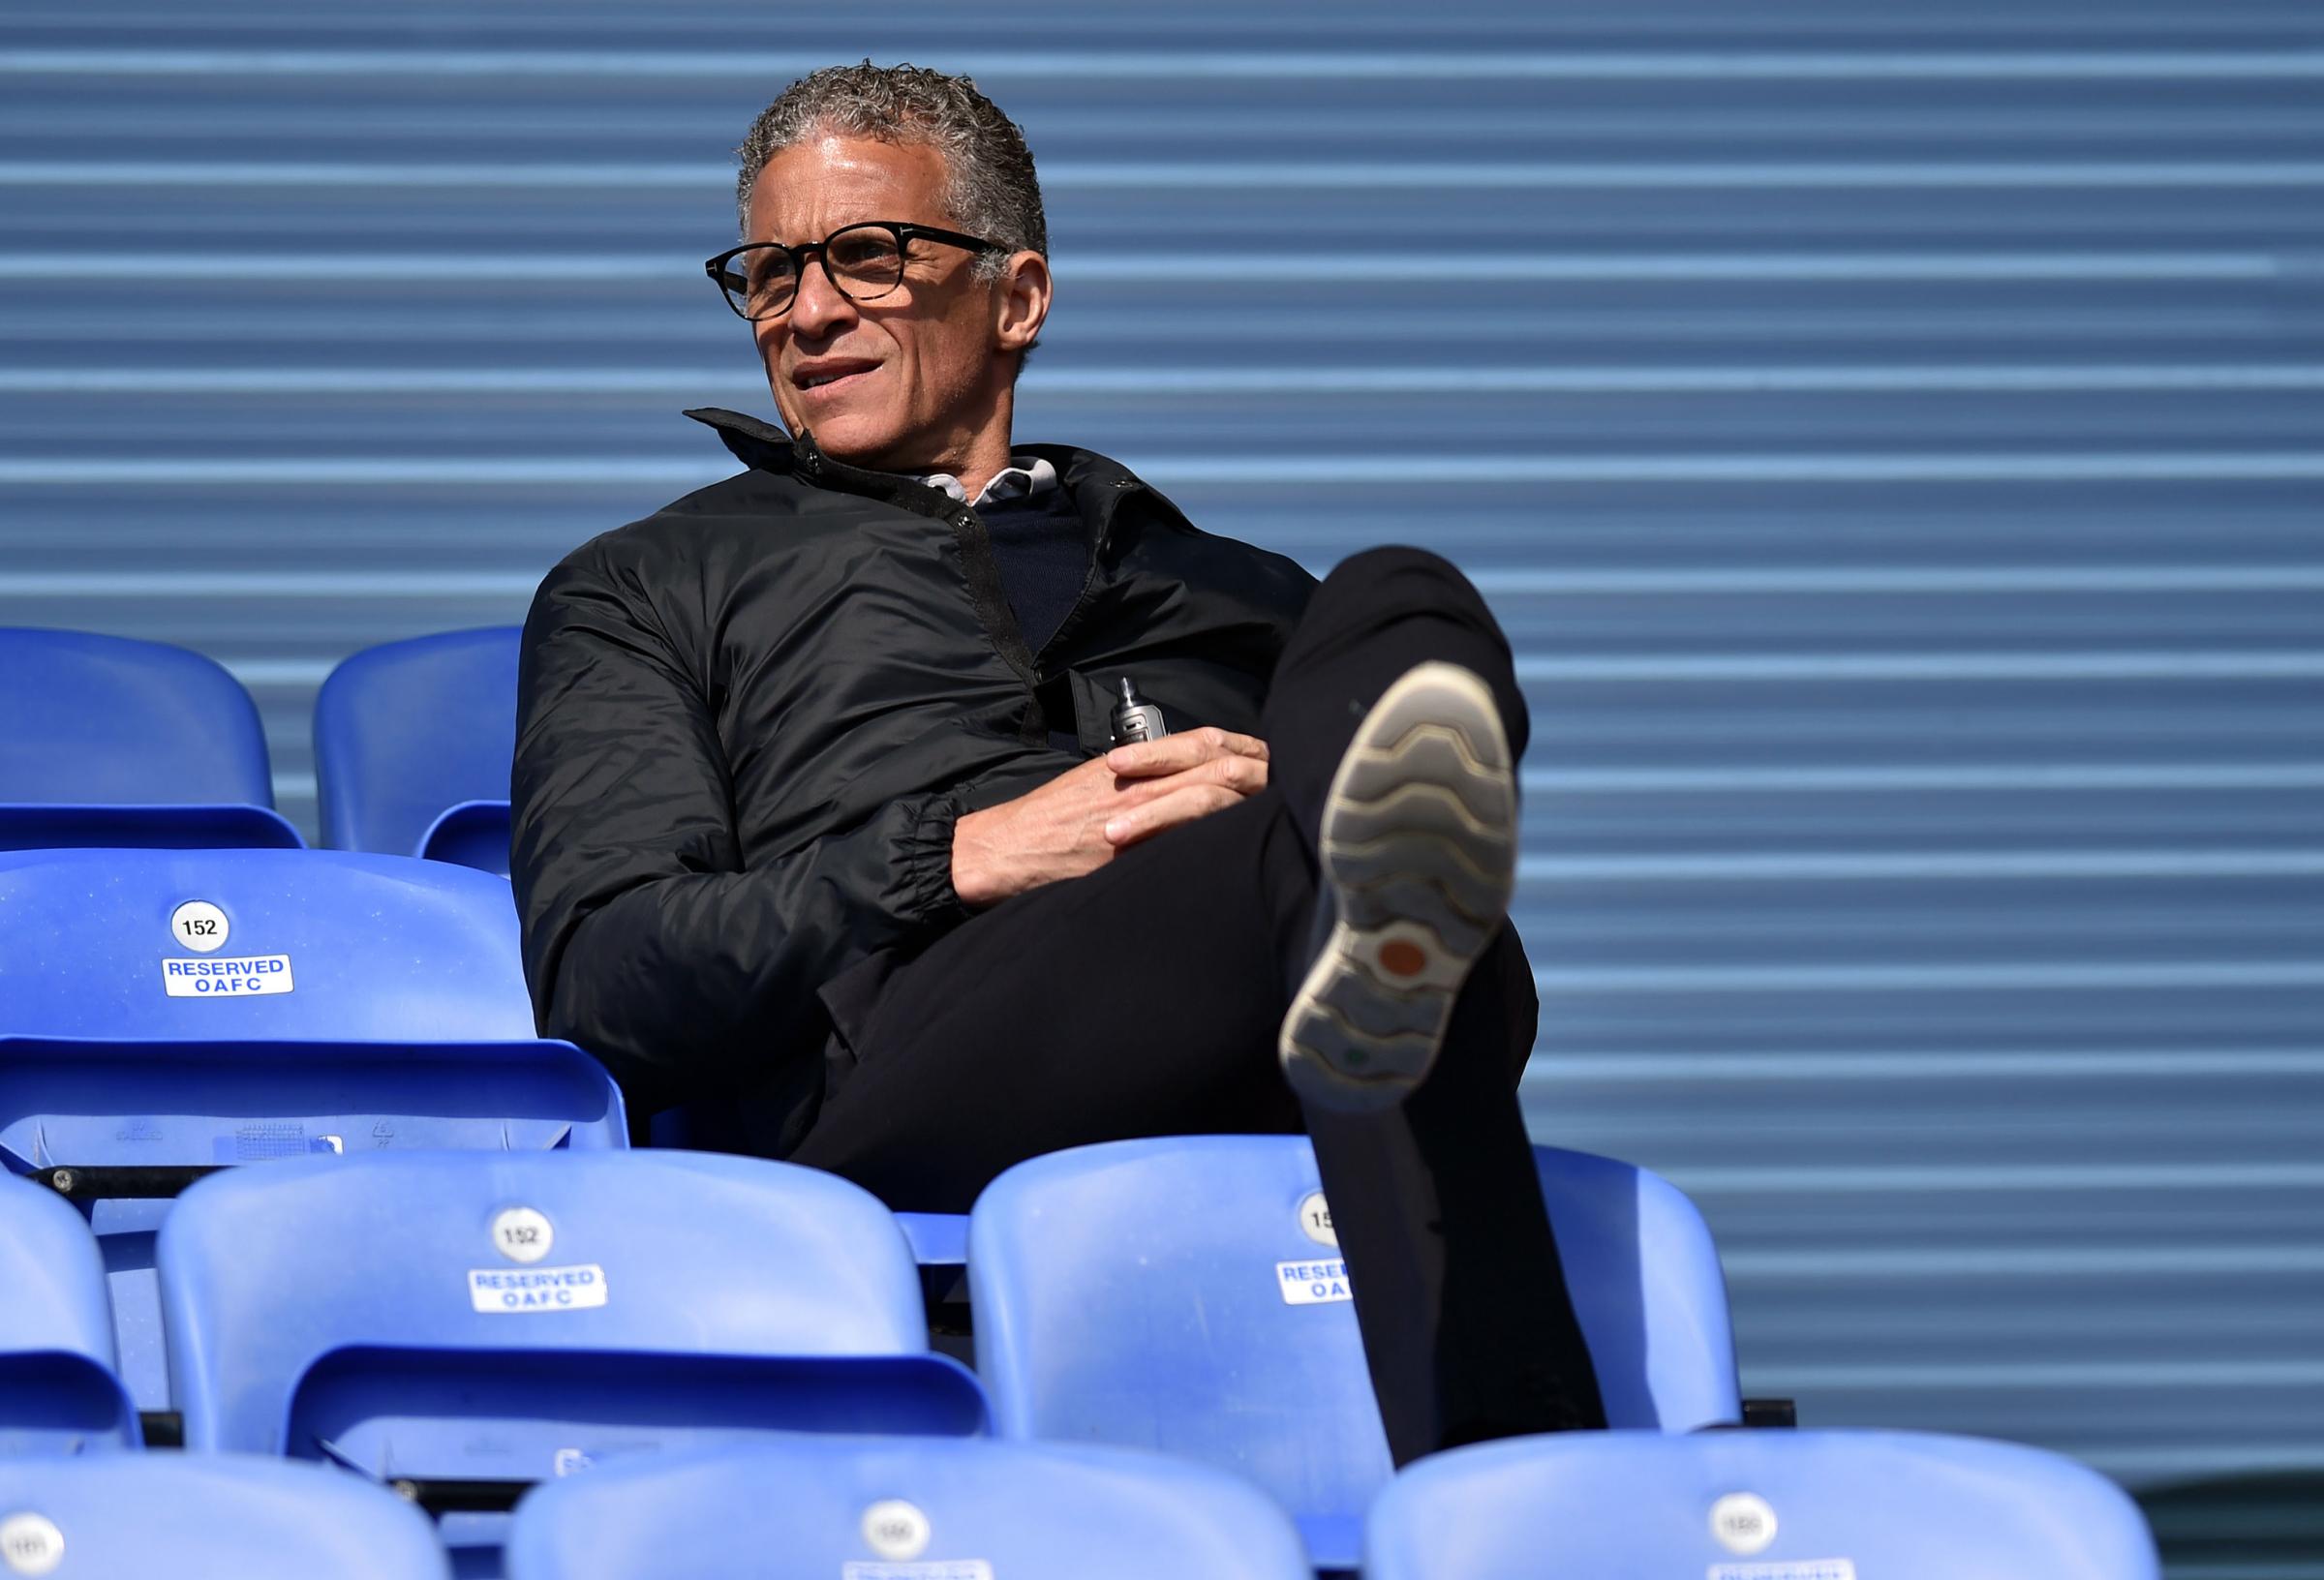 Keith Curle at Boundary Park